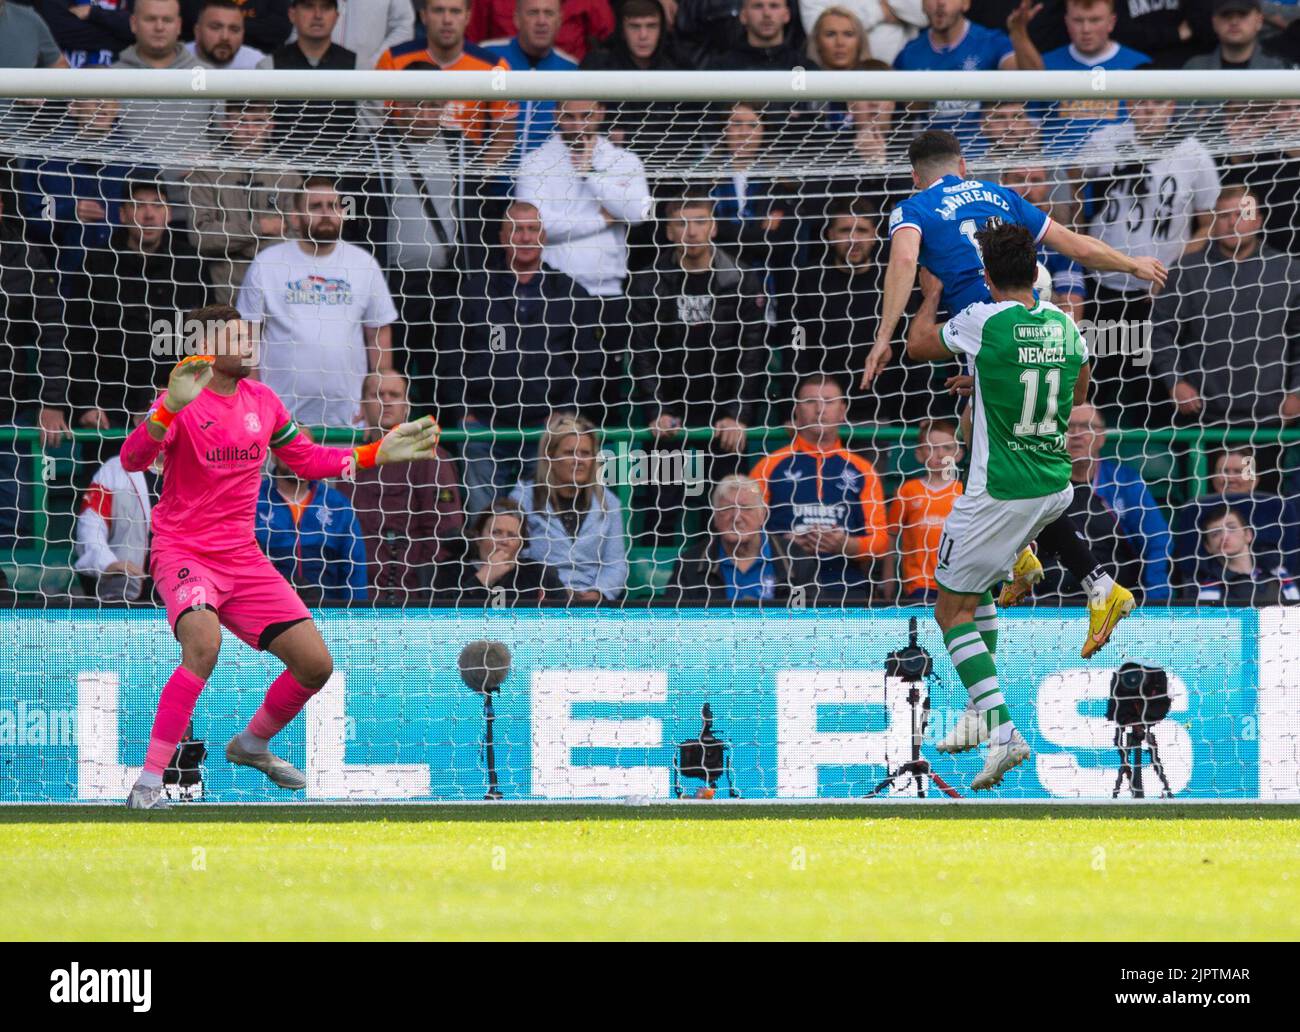 Edinburgh, UK. 20th Aug, 2022. Cinch Premiership - Hibernian v Rangers. 20/08/2022. Hibernian play host to Rangers in the cinch Premiership at Easter Road Stadium, Edinburgh, Midlothian, UK. Pic shows: Ranger's forward, Tom Lawrence, rises above the home defence to put the visitors 2-1 ahead in the 58rh minute. Credit: Ian Jacobs/Alamy Live News Stock Photo